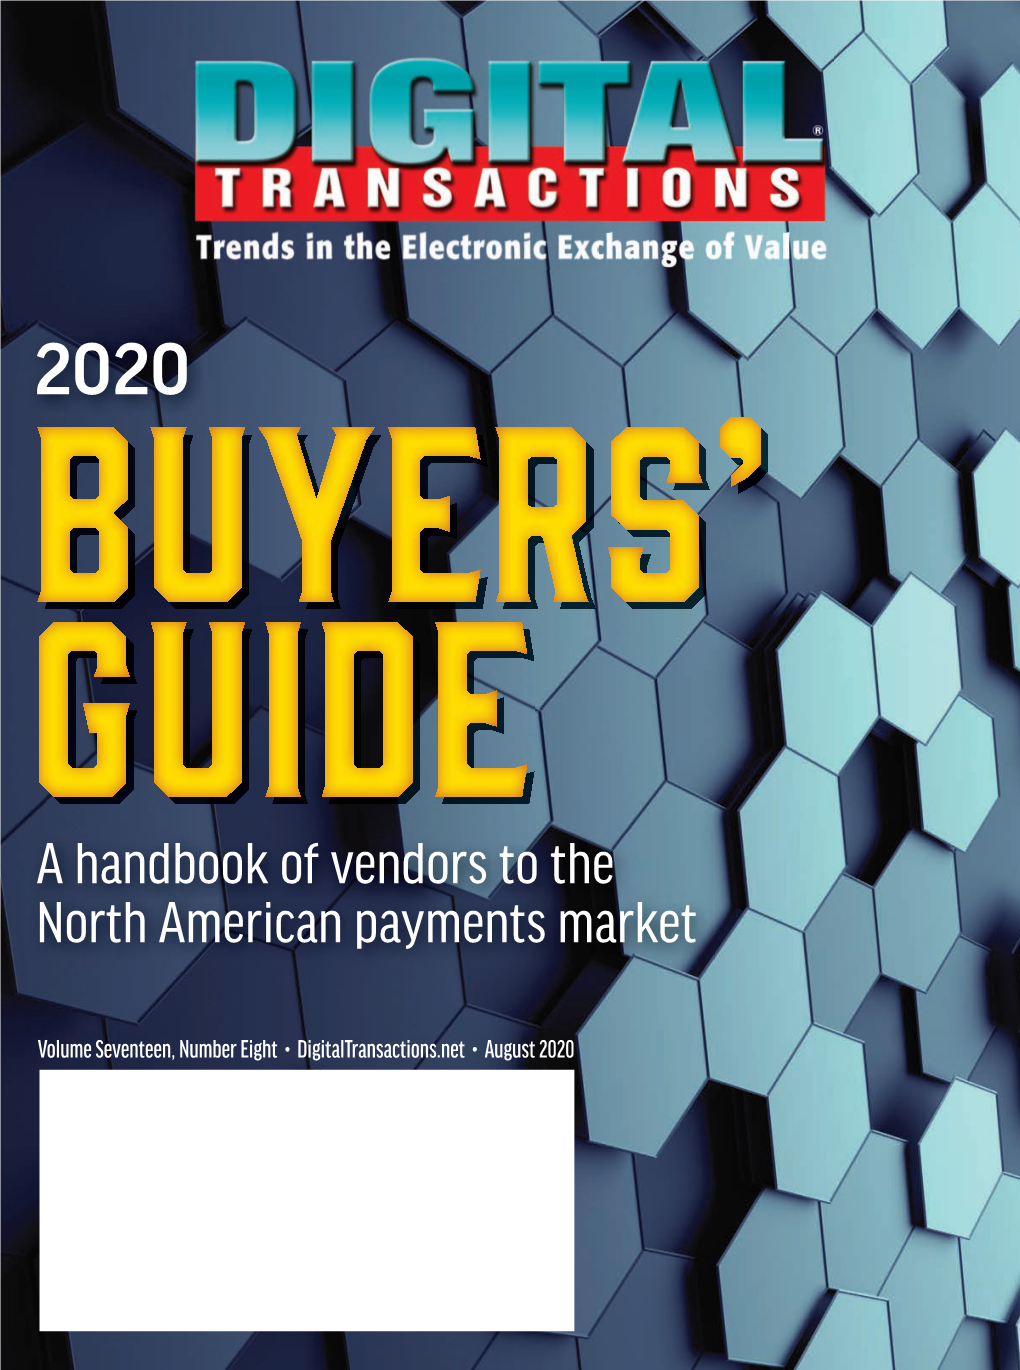 A Handbook of Vendors to the North American Payments Market